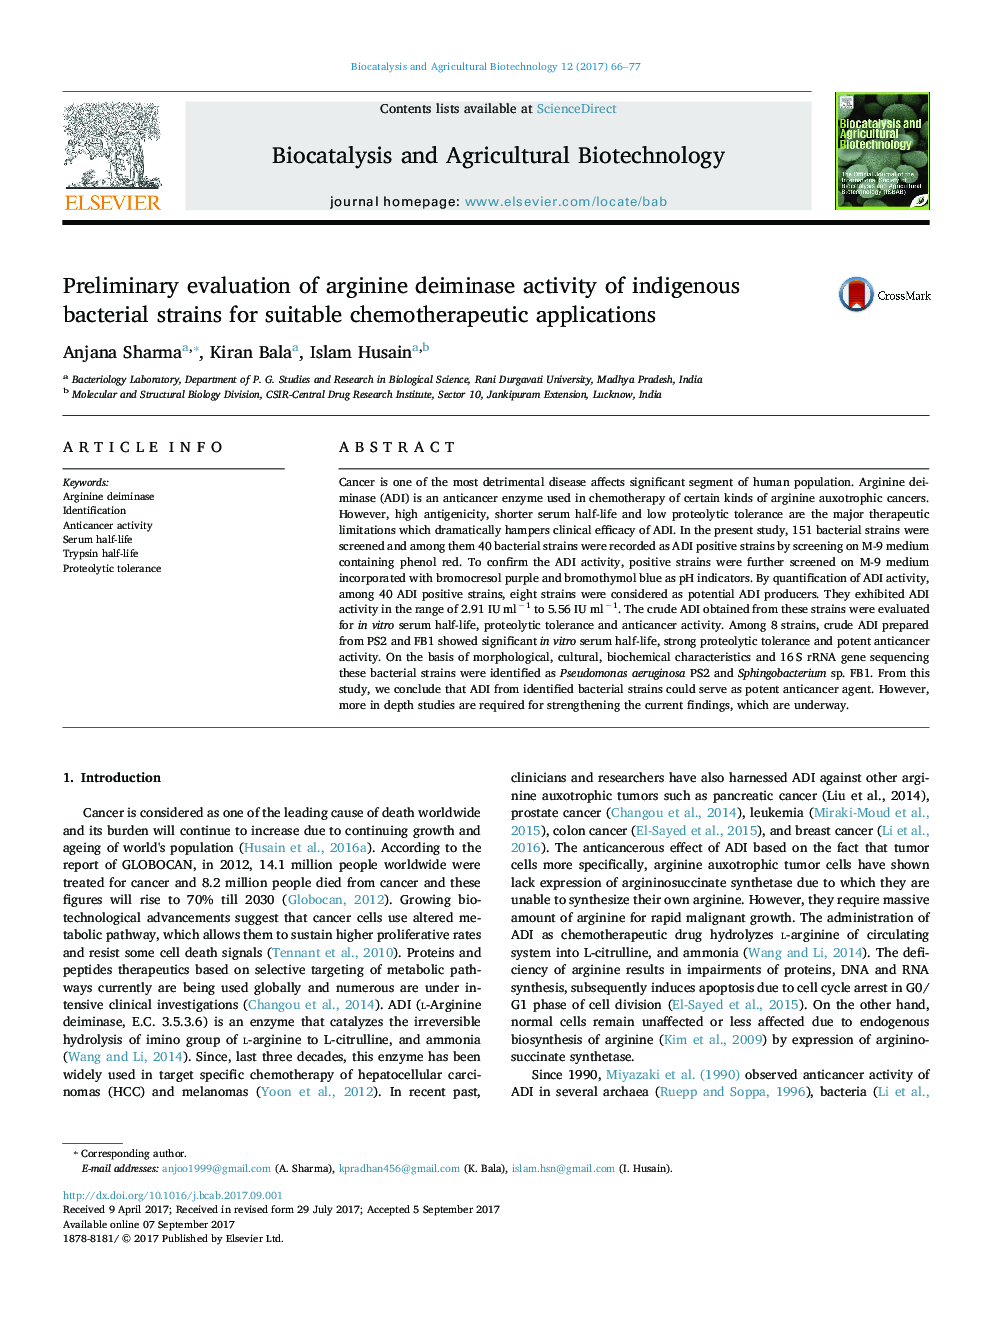 Preliminary evaluation of arginine deiminase activity of indigenous bacterial strains for suitable chemotherapeutic applications